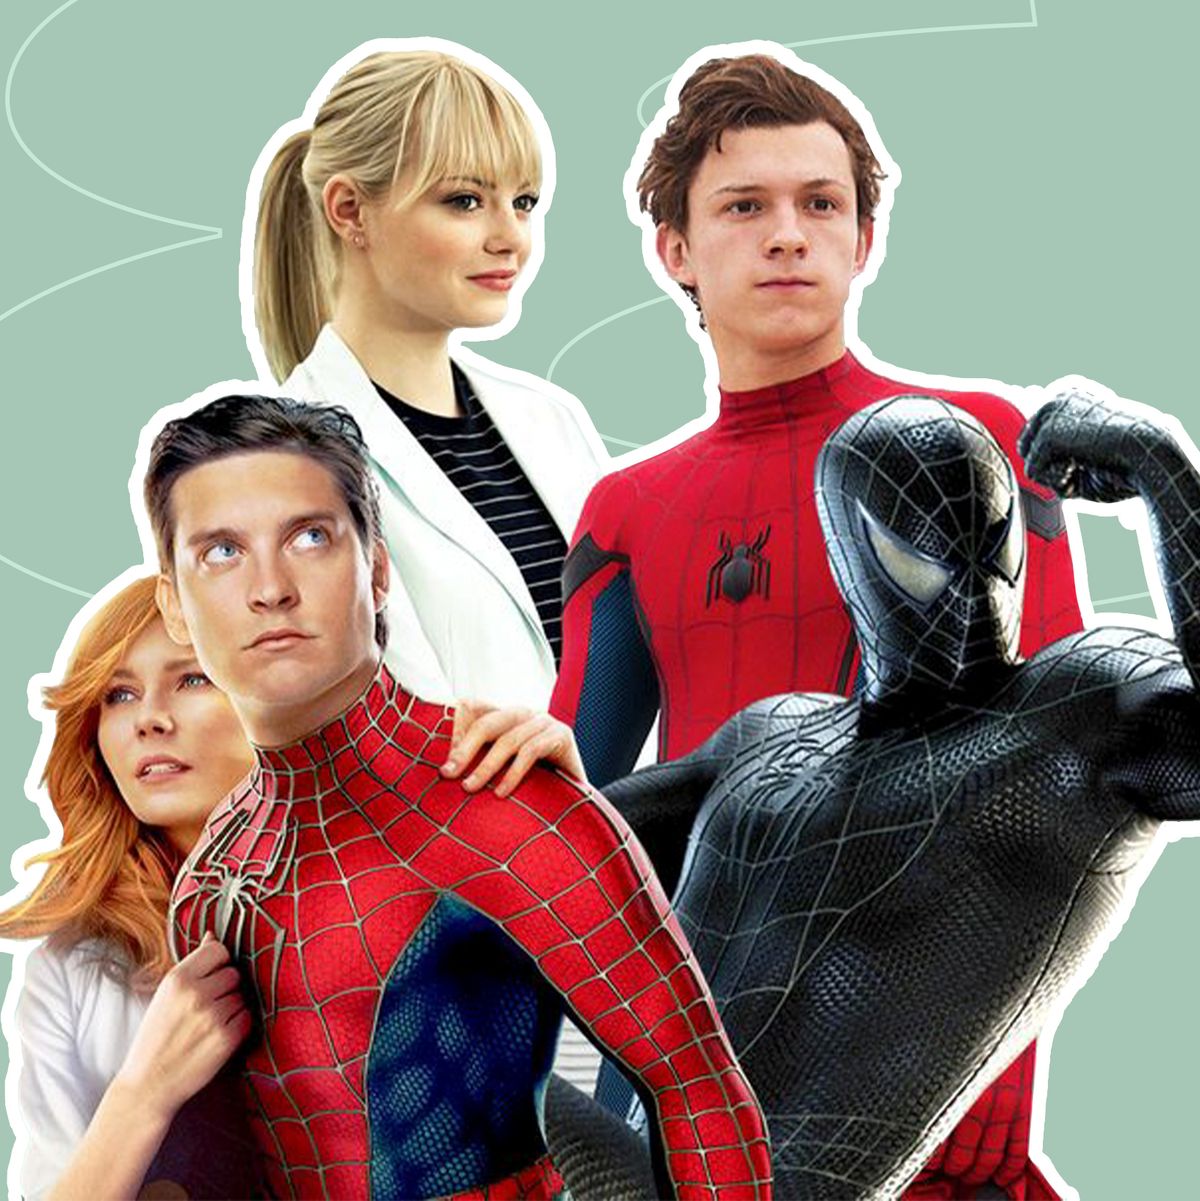 How to Watch All the Spider-Man Movies in Chronological Plot Order